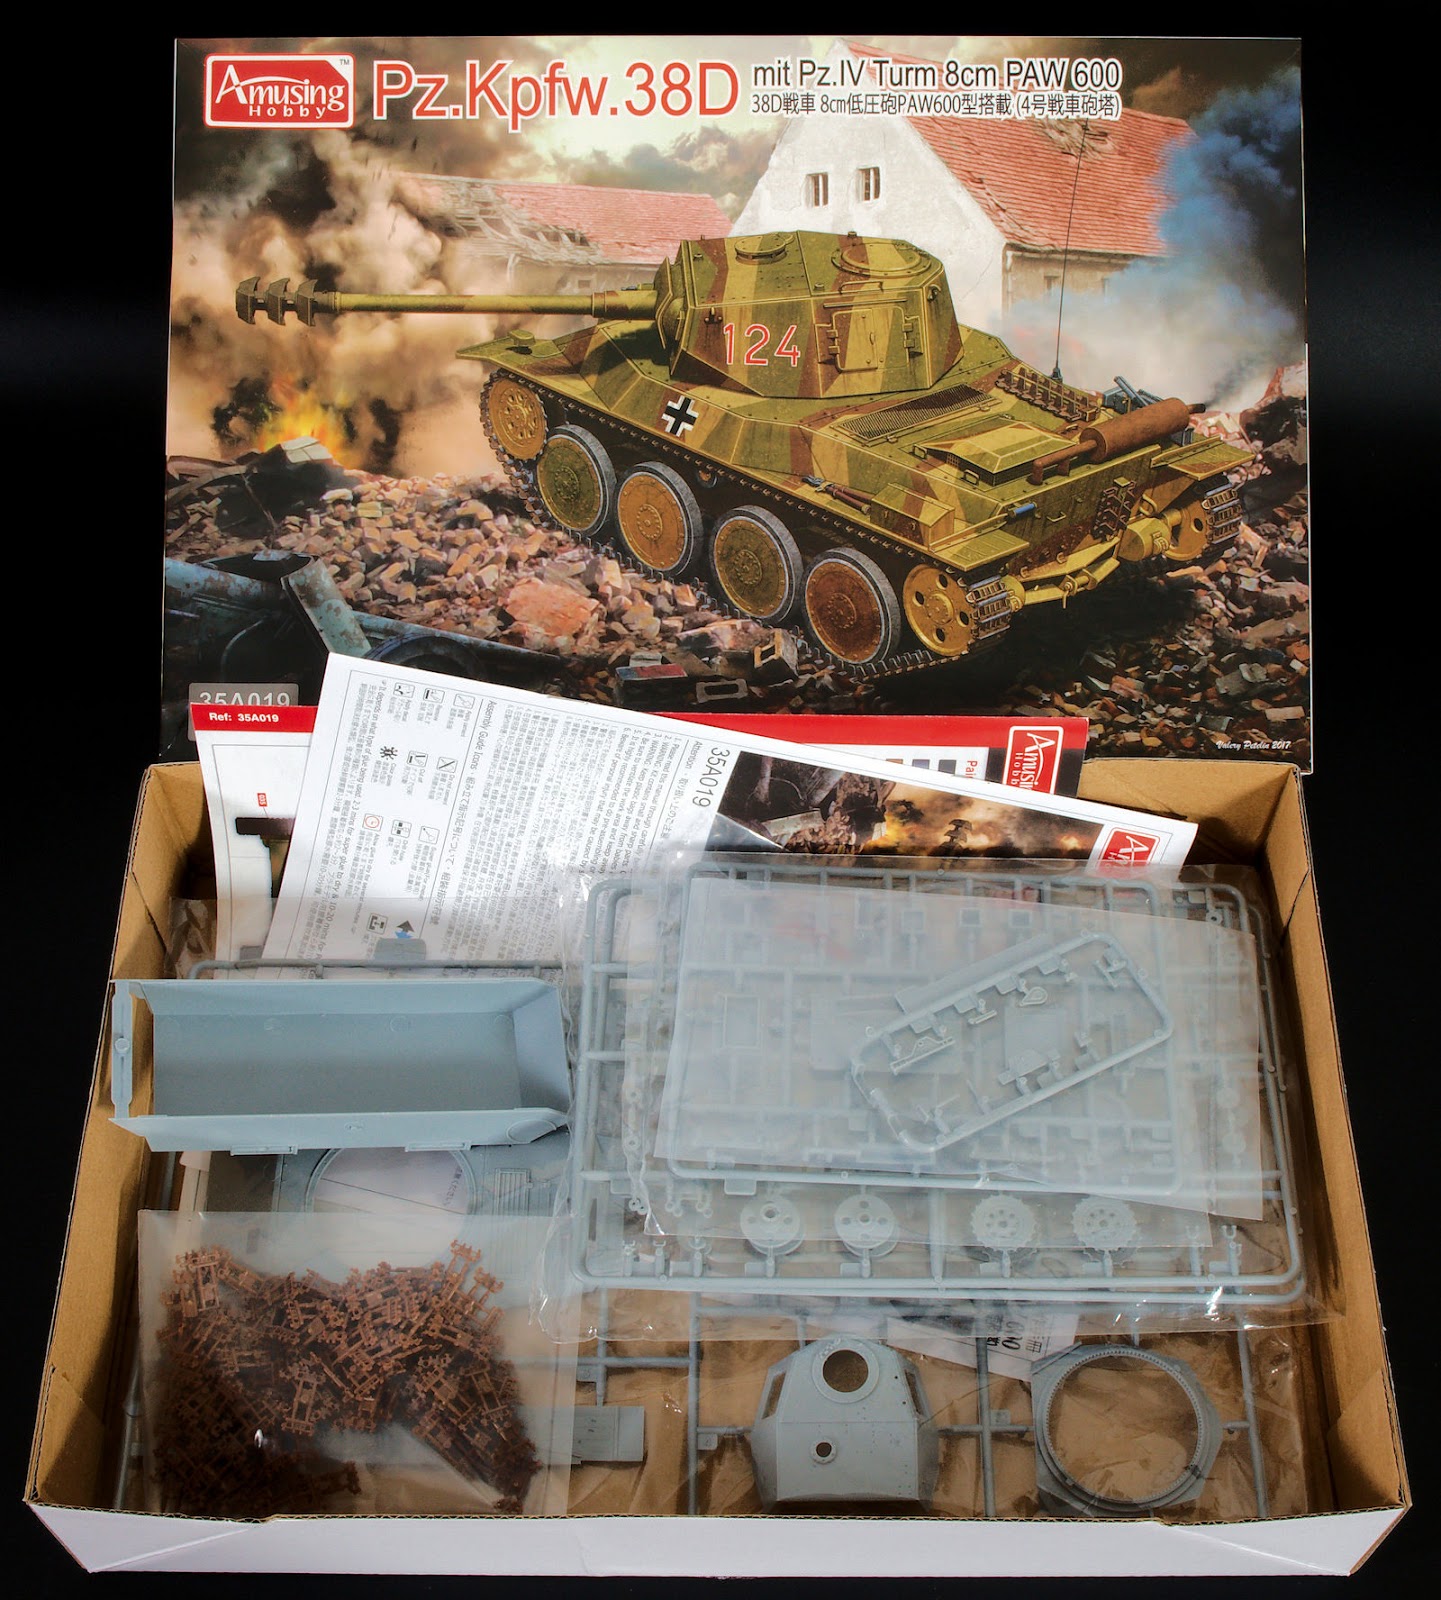 The Modelling News: In-Boxed:1/35th scale Pz.Kpfw.38D mitt PZ.IV turm 8cm  PAW 600 from Amusing Hobby